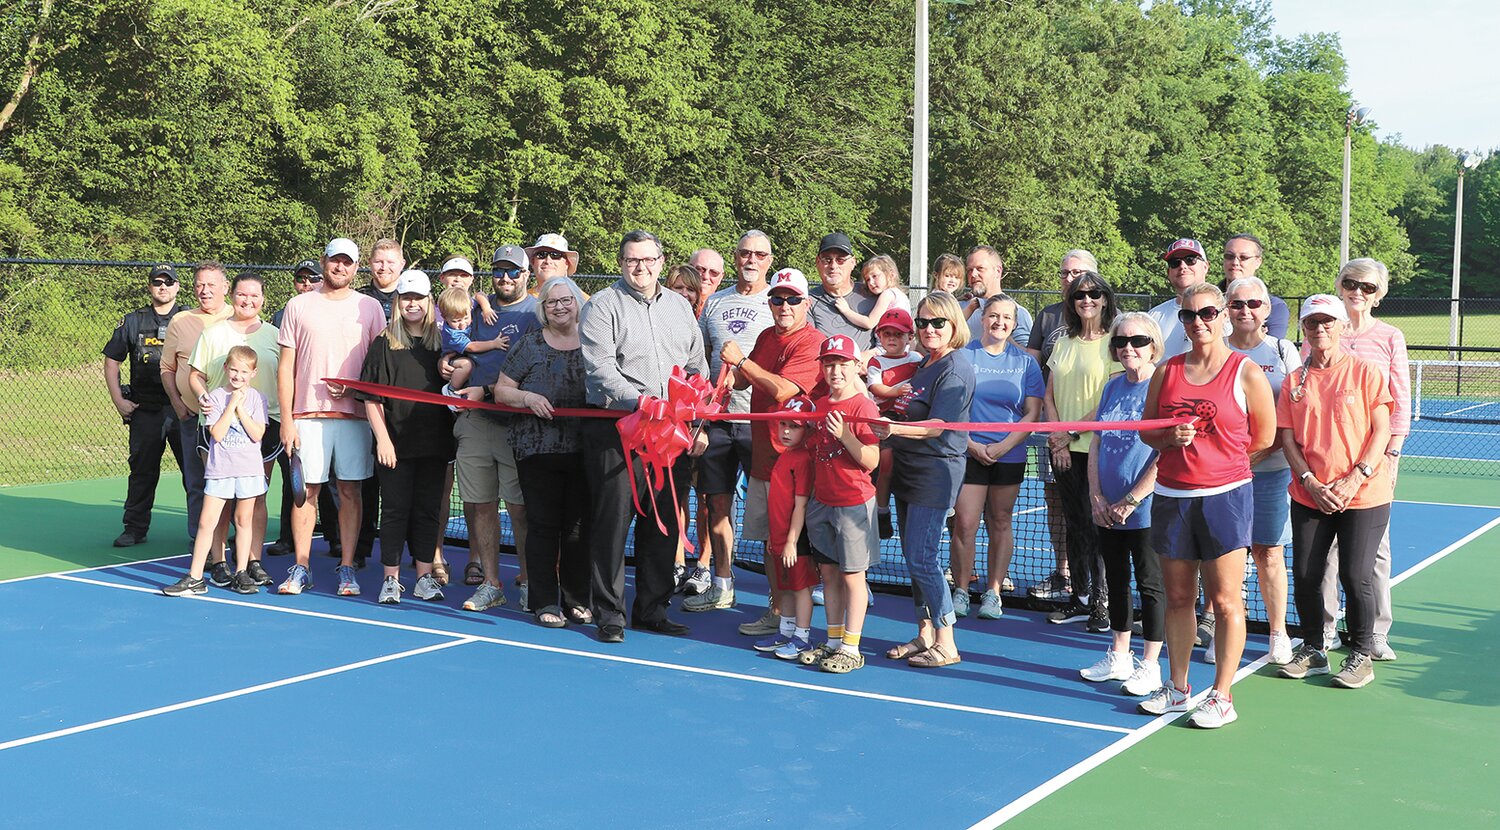 Bridget Pittman, Matthew Pittman, Gary Pittman, Meagan Tucker of Dresden and Stacey French of Paris were some of the first players to fill the six courts.